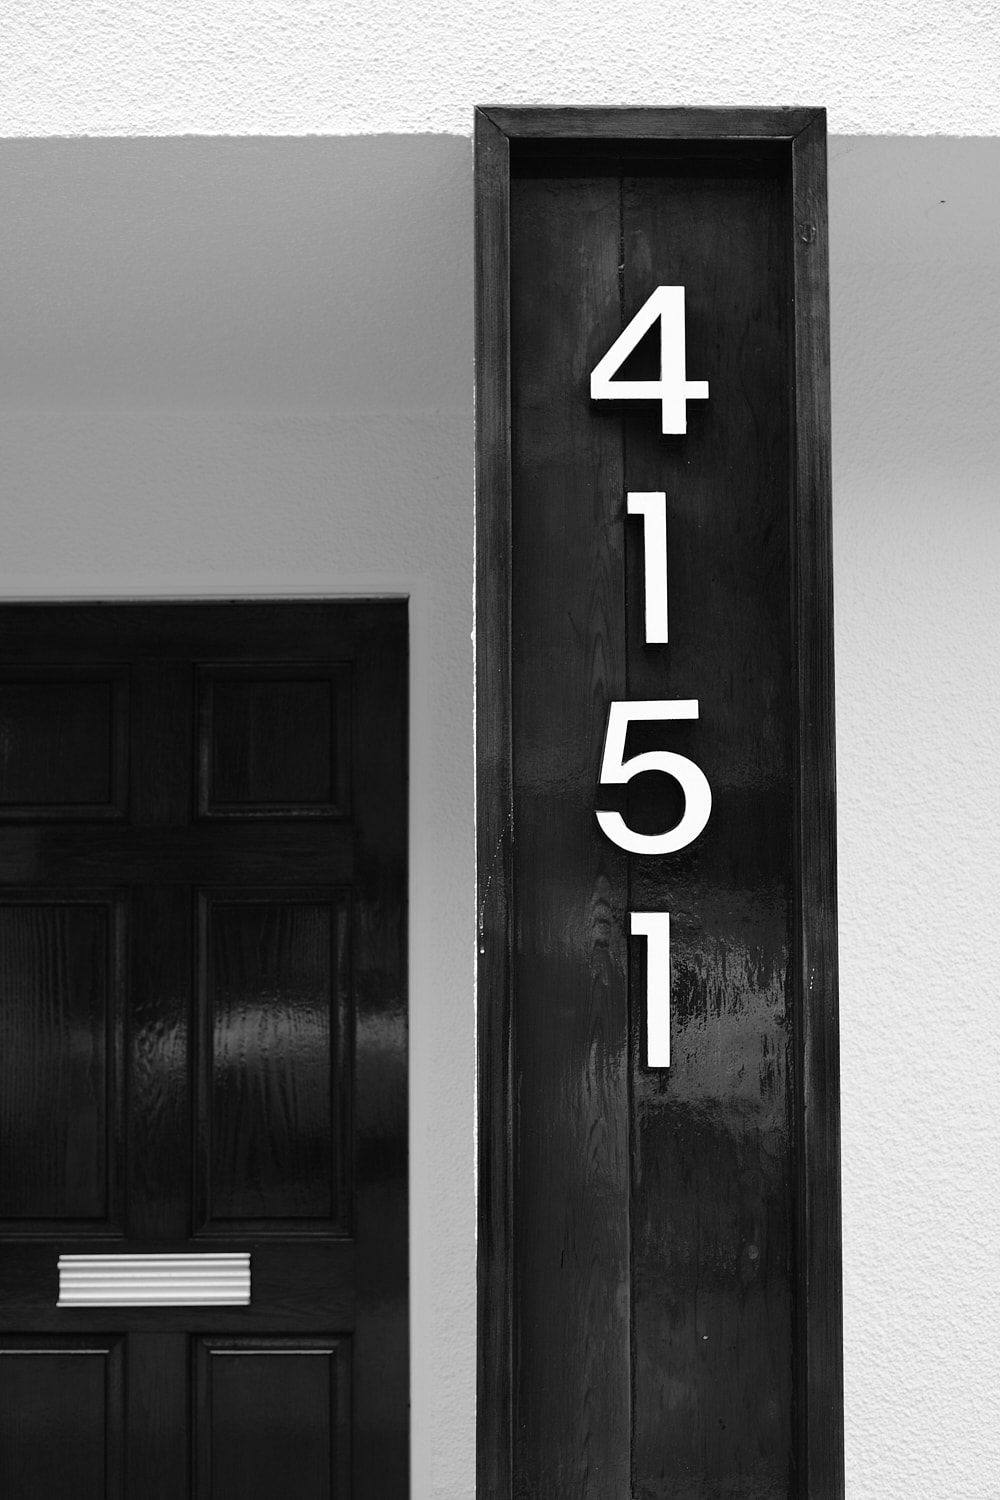 Black and white portrait photo of a house number on the side of a very expensive beach house. The metal numbers are positioned vertically inside a wooden box and read 4151.